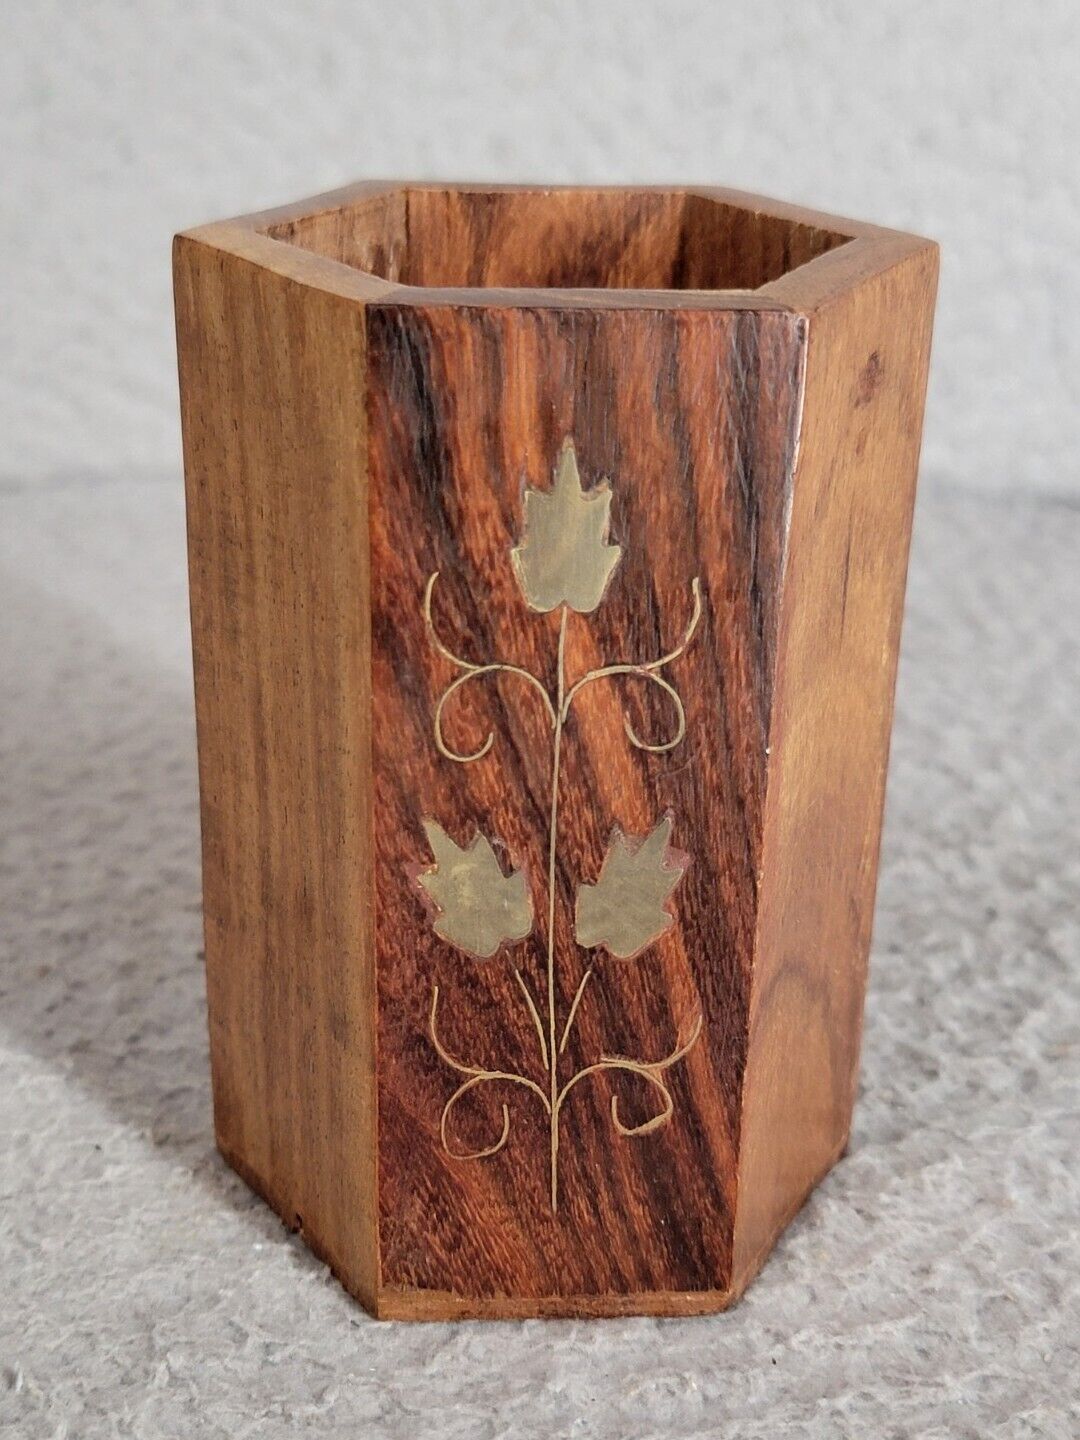 Vintage Leaves Inlay Design Pen Pencil Holder Wooden Decorative Collectible Hex